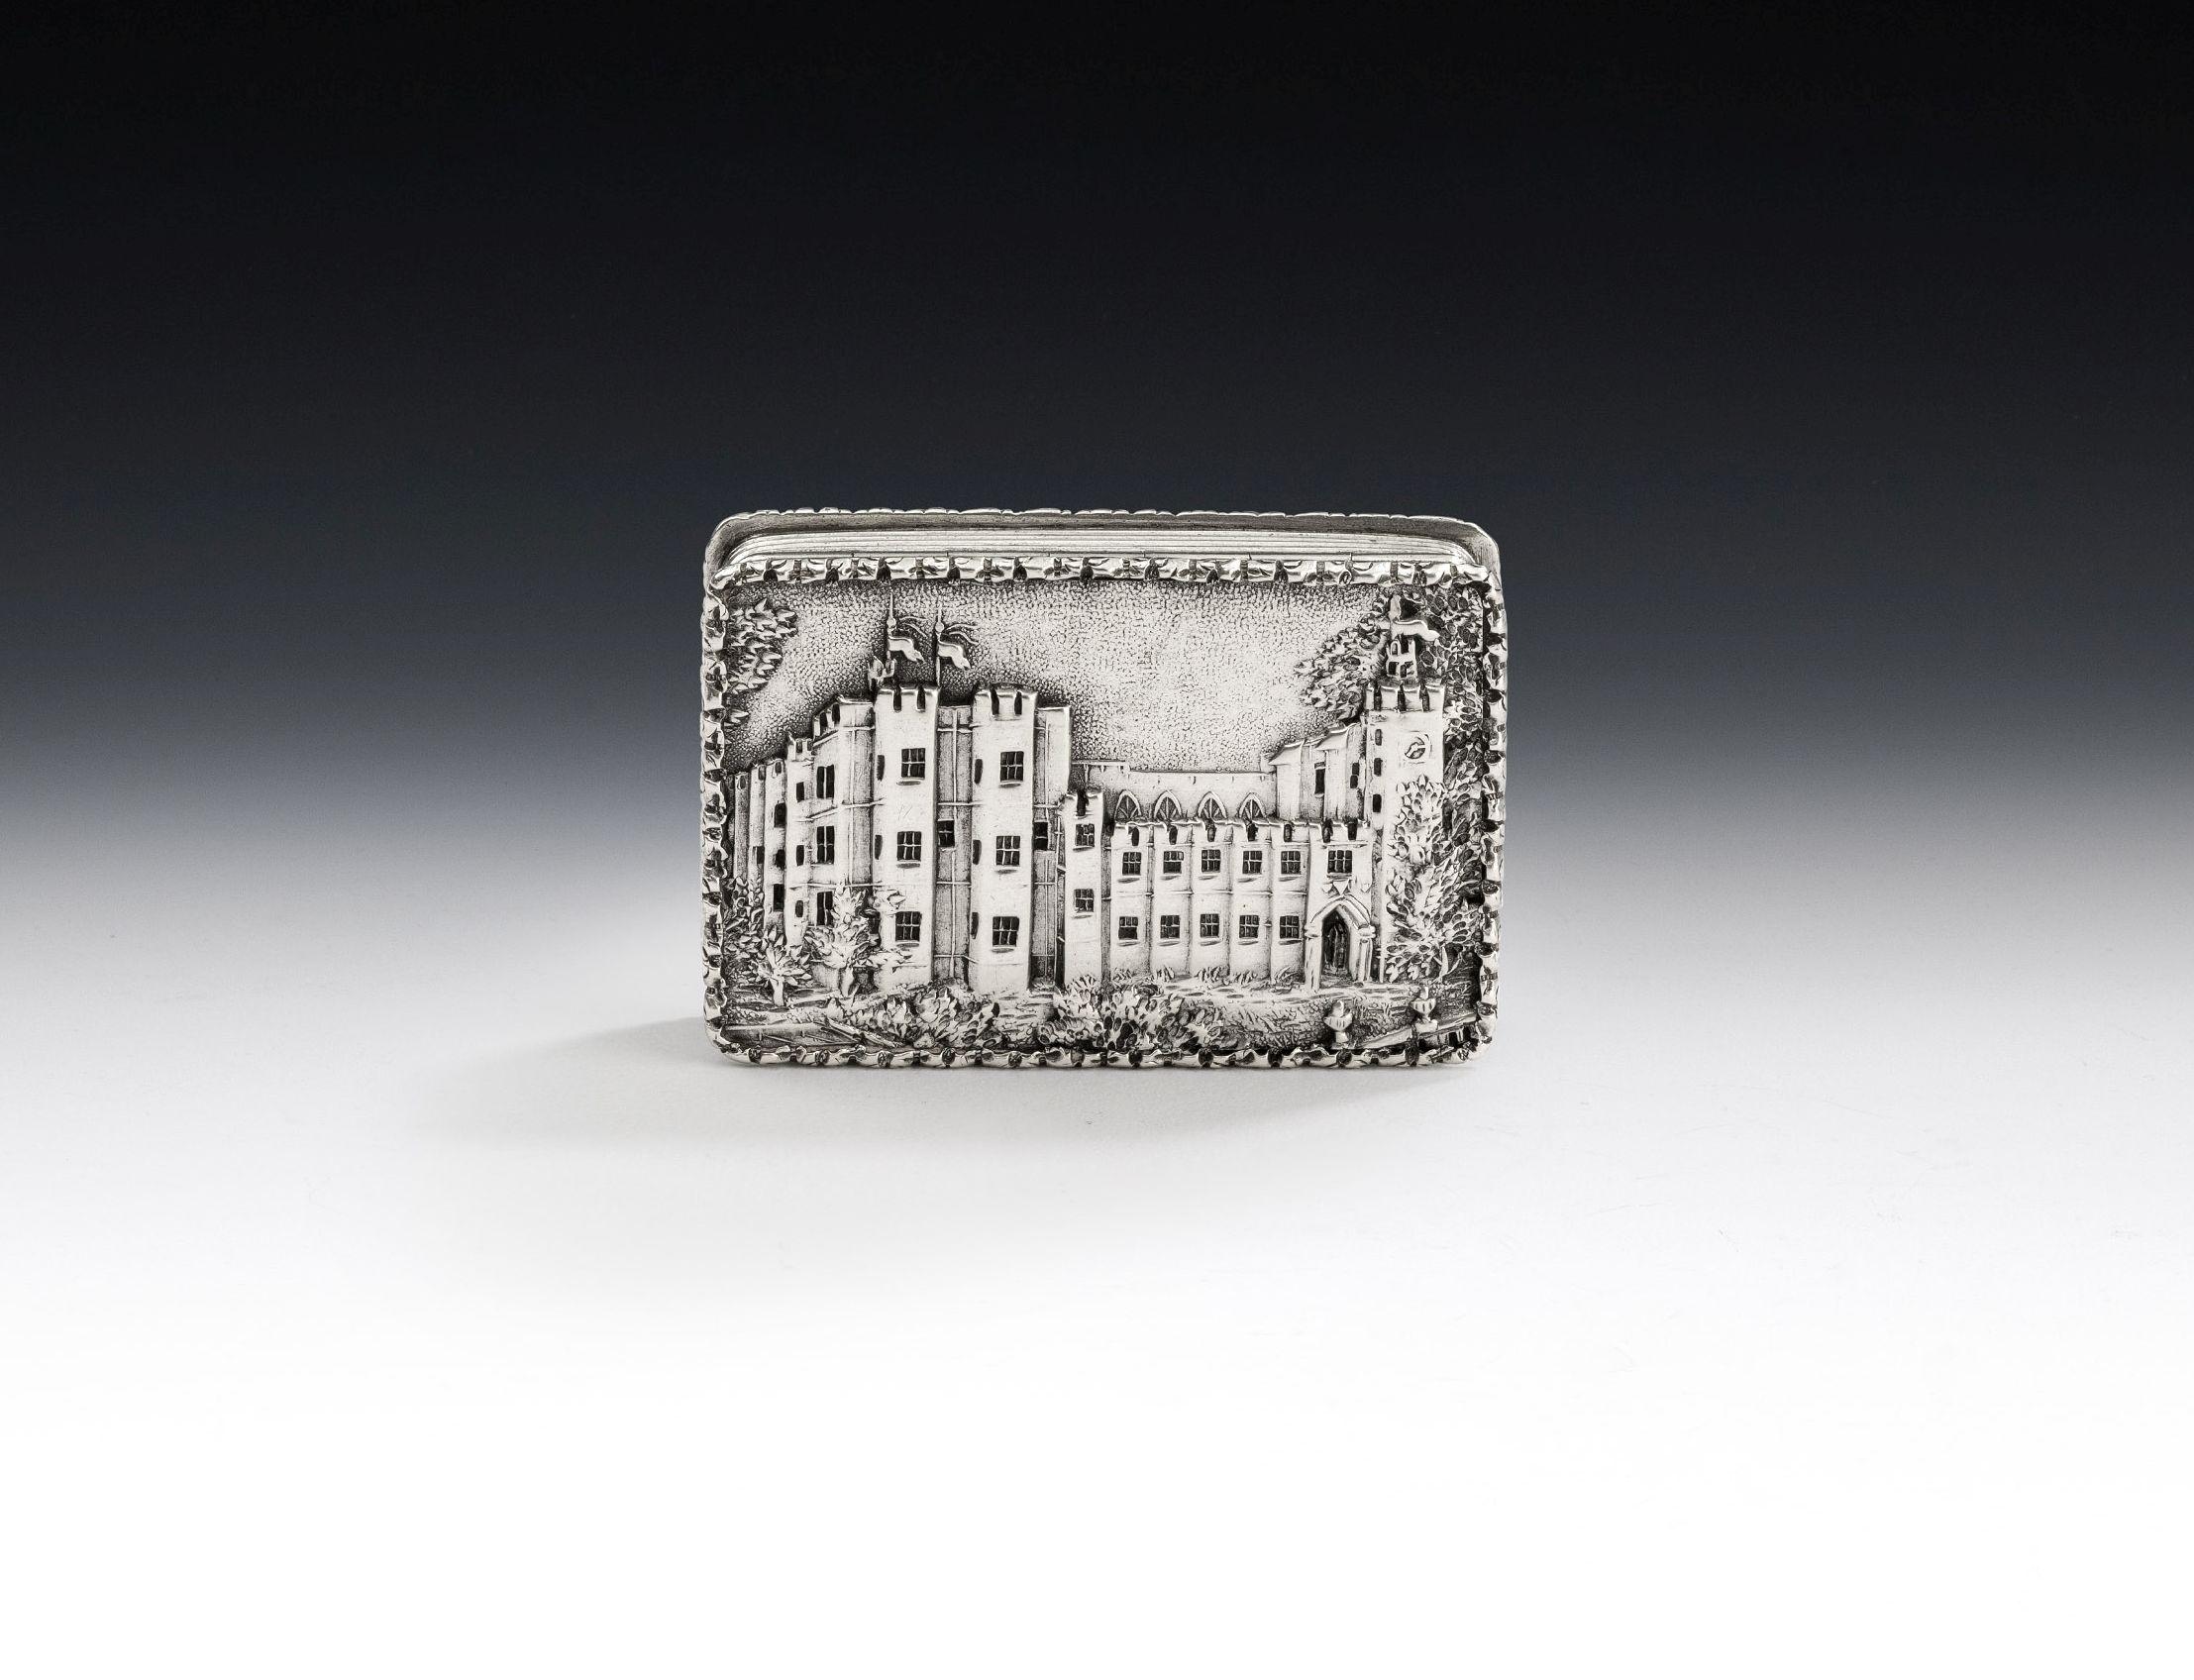 Kenilworth Castle. An extremely rare Castle Top Vinaigrette made in Birmingham in 1837 by Nathaniel Mills. The Vinaigrette is broad rectangular in form and the cover displays a raised castle top scene, in relief, of Kenilworth Castle in